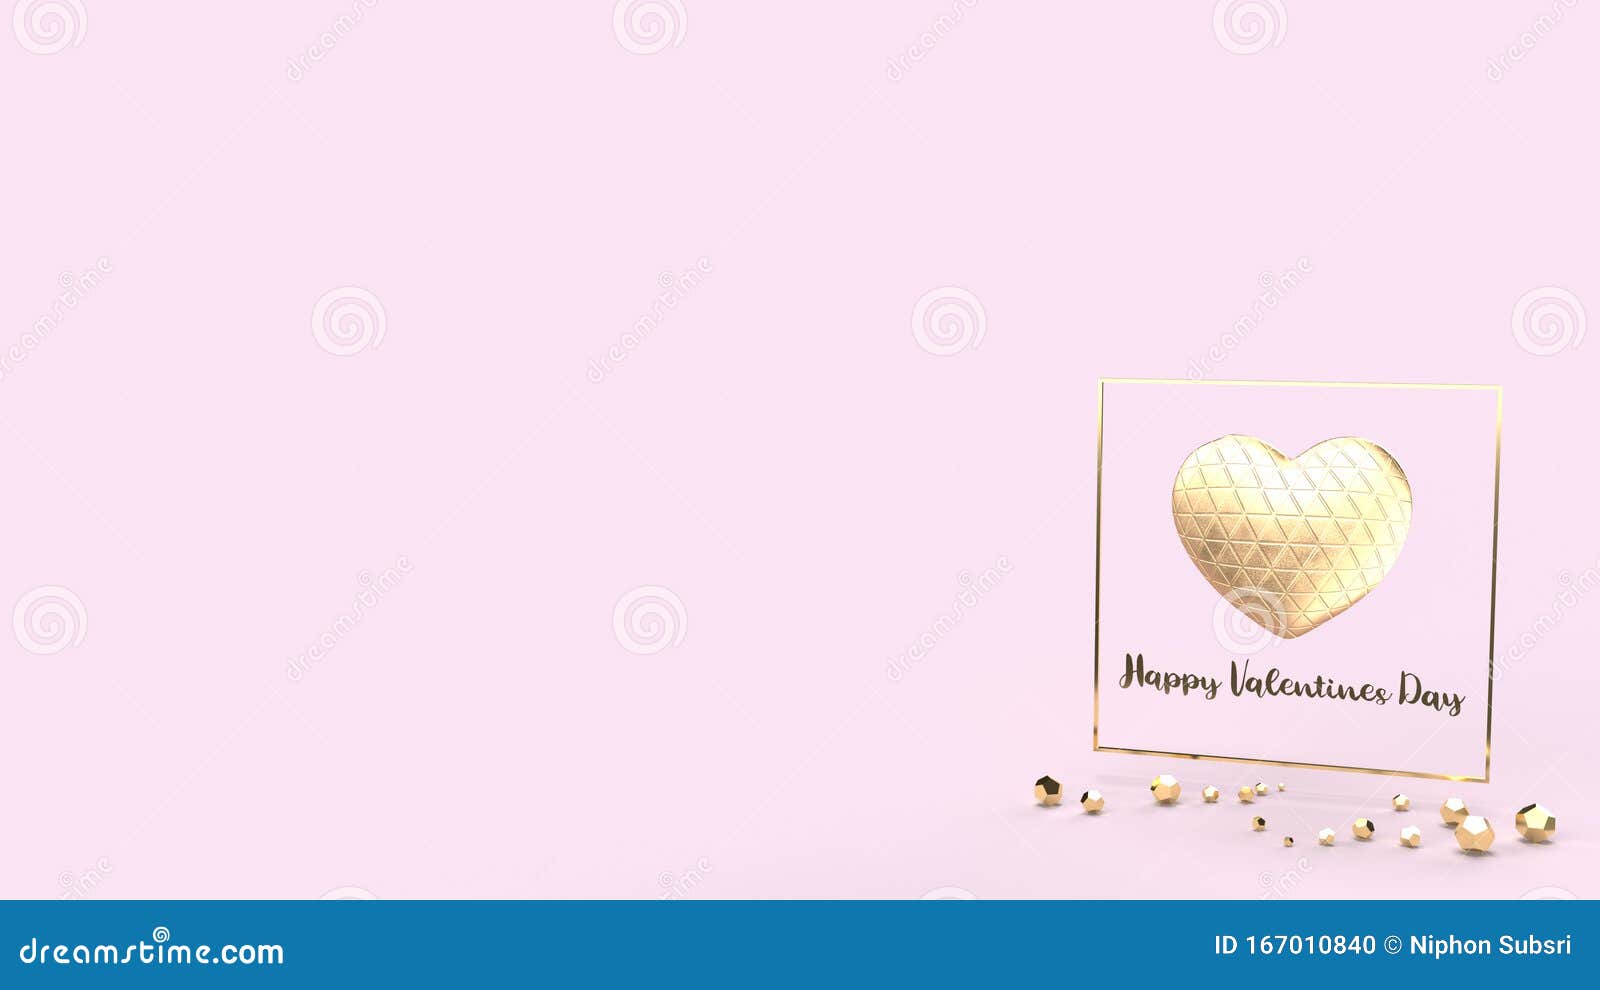 Gold Heart and Gold Fram on Pink Background 3d Rendering for Valentine ...